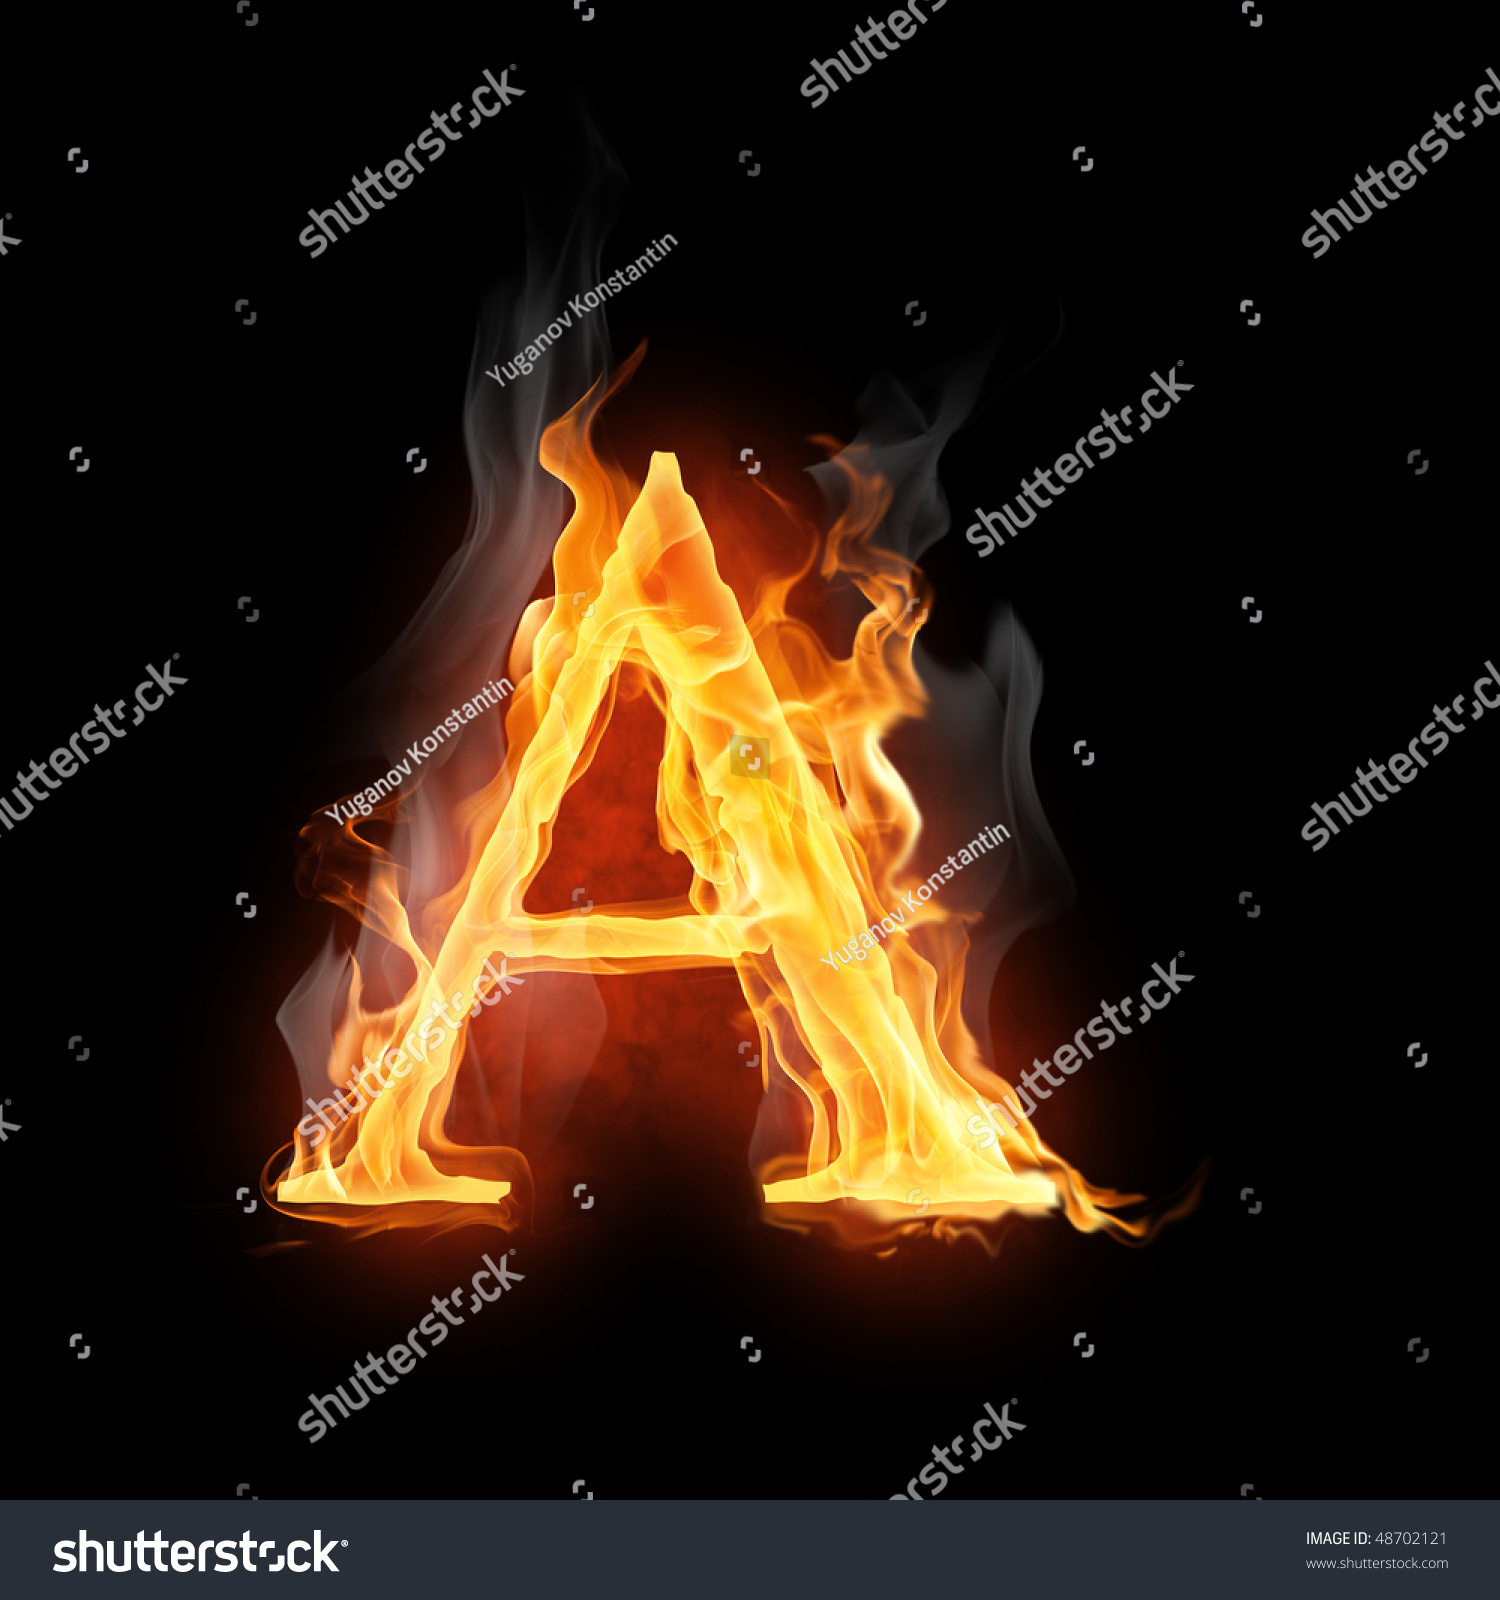 431 Bright flamy symbol on the black background Images, Stock Photos ...